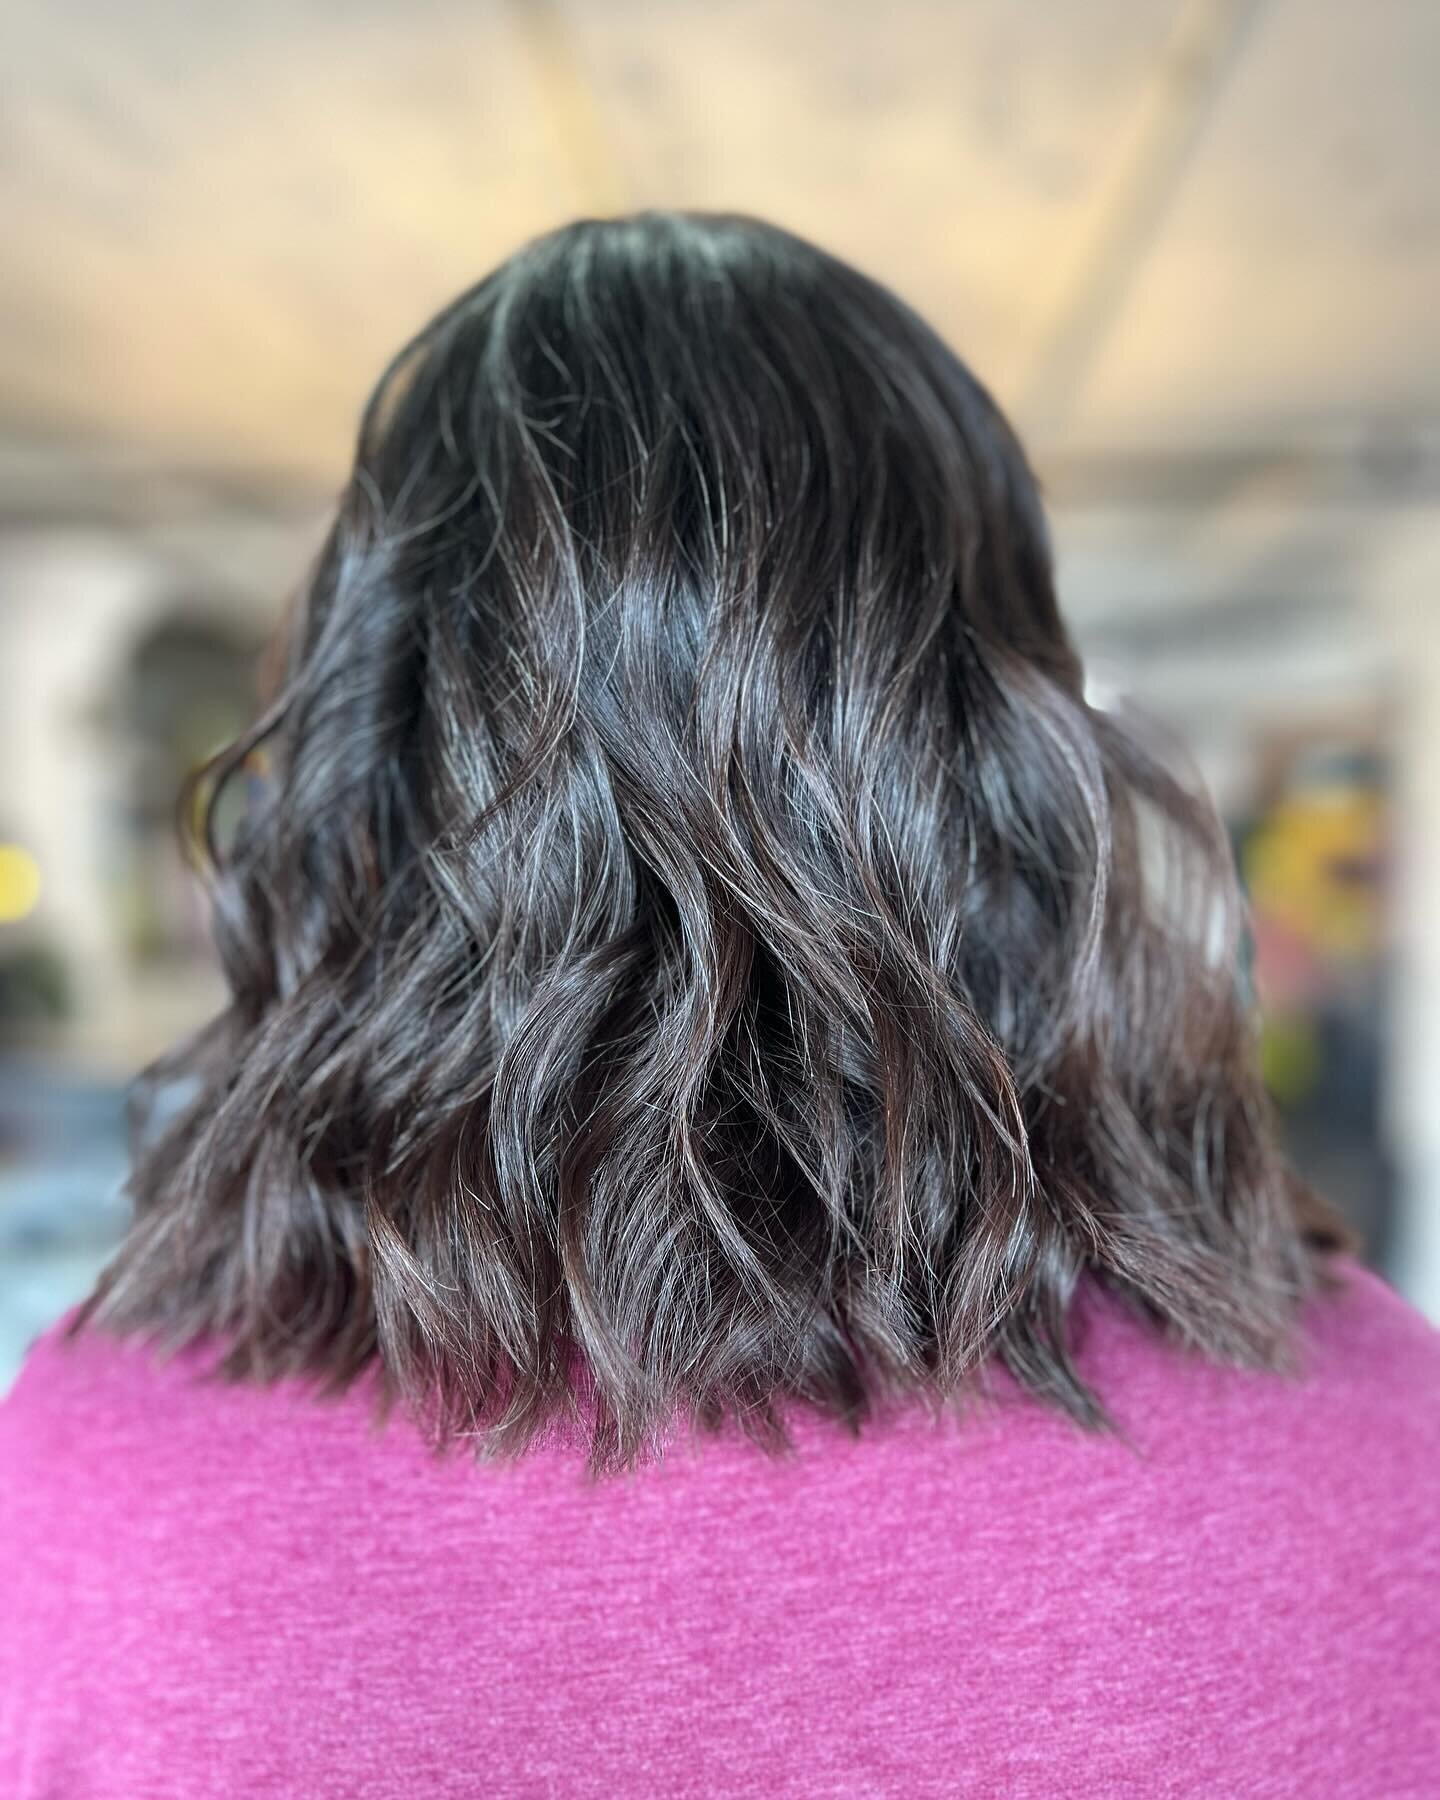 🤍We accept you, irregardless of how long it&rsquo;s been since you cut your hair. We understand life happens and sometimes when your parenthood journey starts, self care stops. So bring your 4 year old hair in here and let us get you to the hot momm